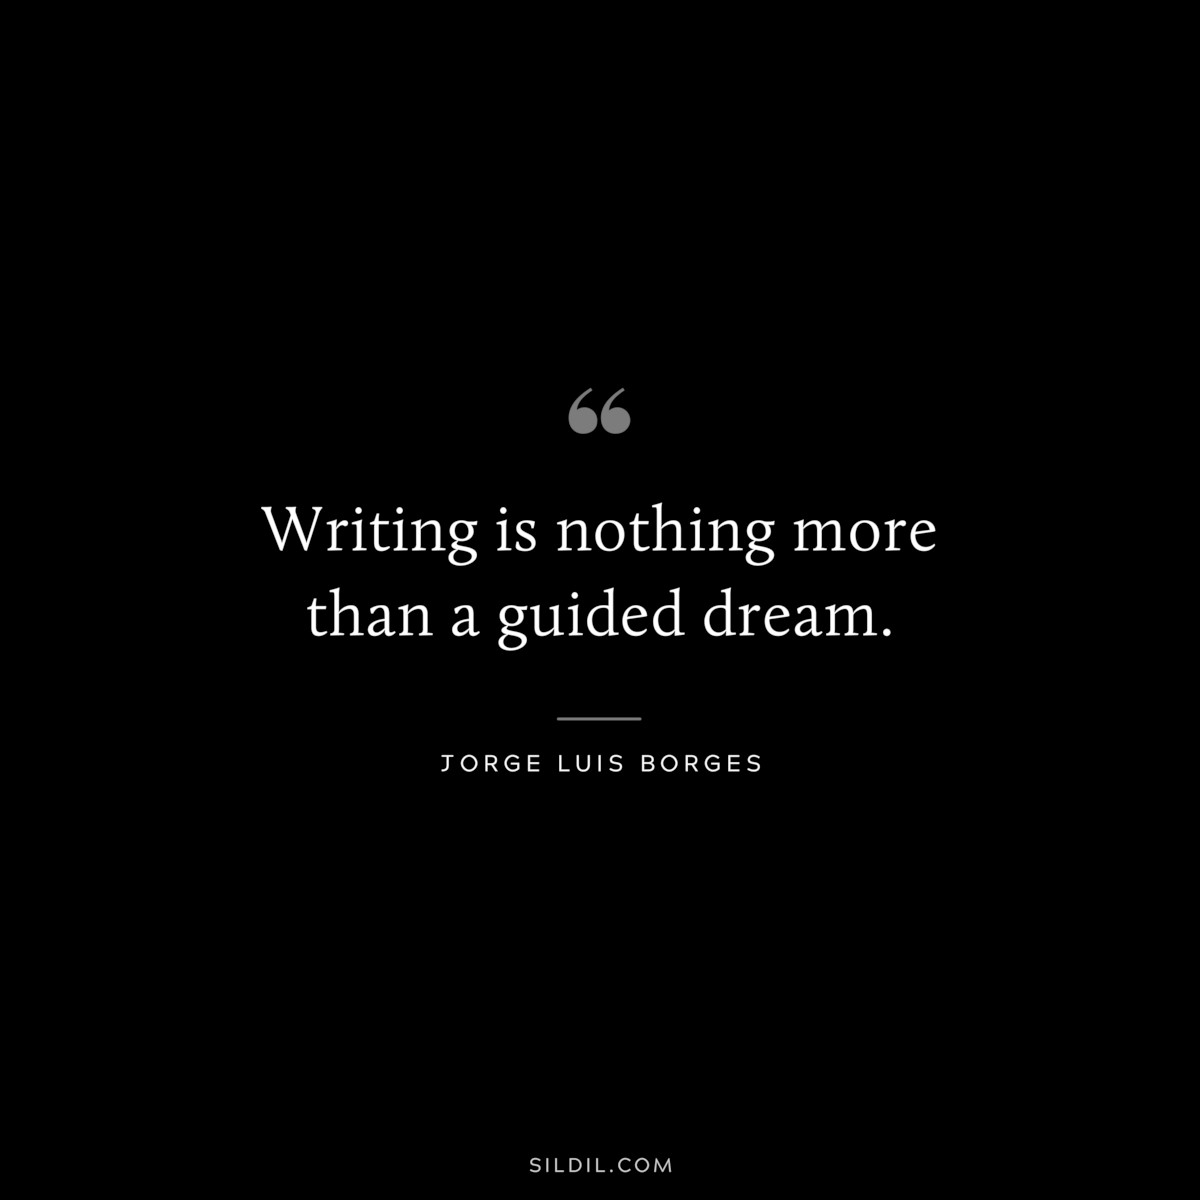 Writing is nothing more than a guided dream. ― Jorge Luis Borges